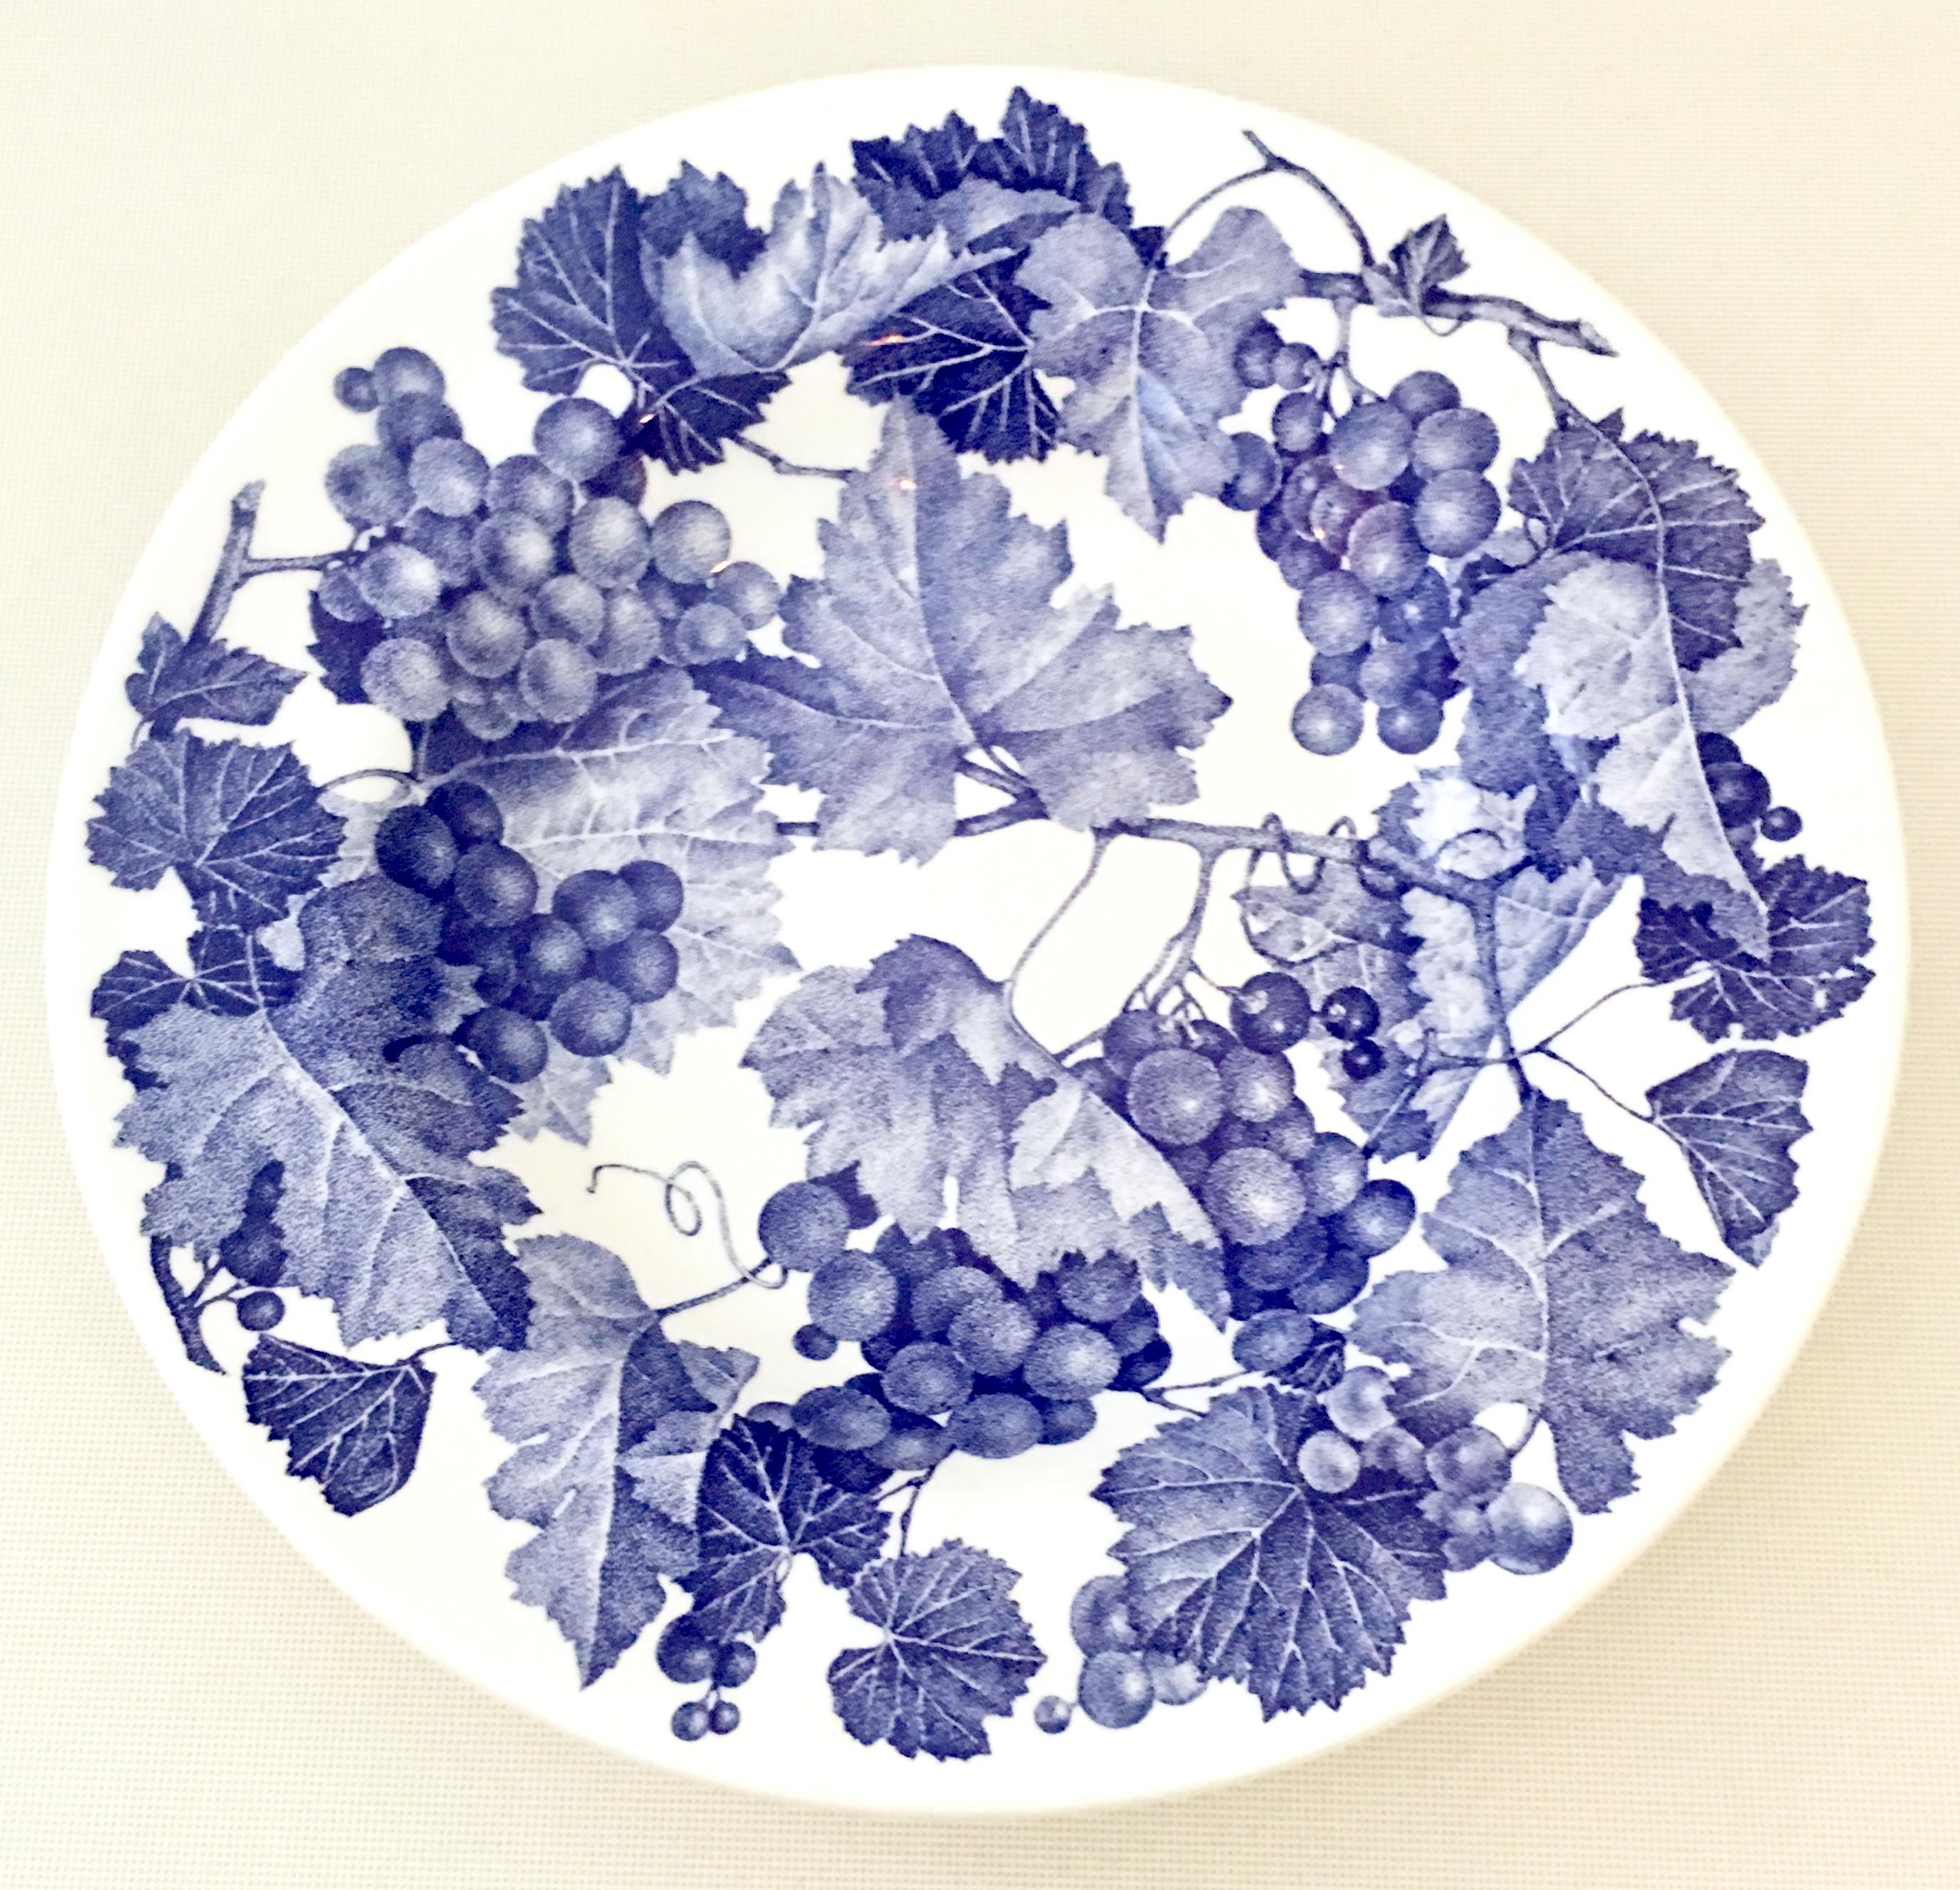 20th century Italian ceramic pottery rim soup bowls by, La Primula set of six pieces. Features a bright whit ground with ink blue grape vine pattern. Each pieces is signed on the underside, made in Italy.